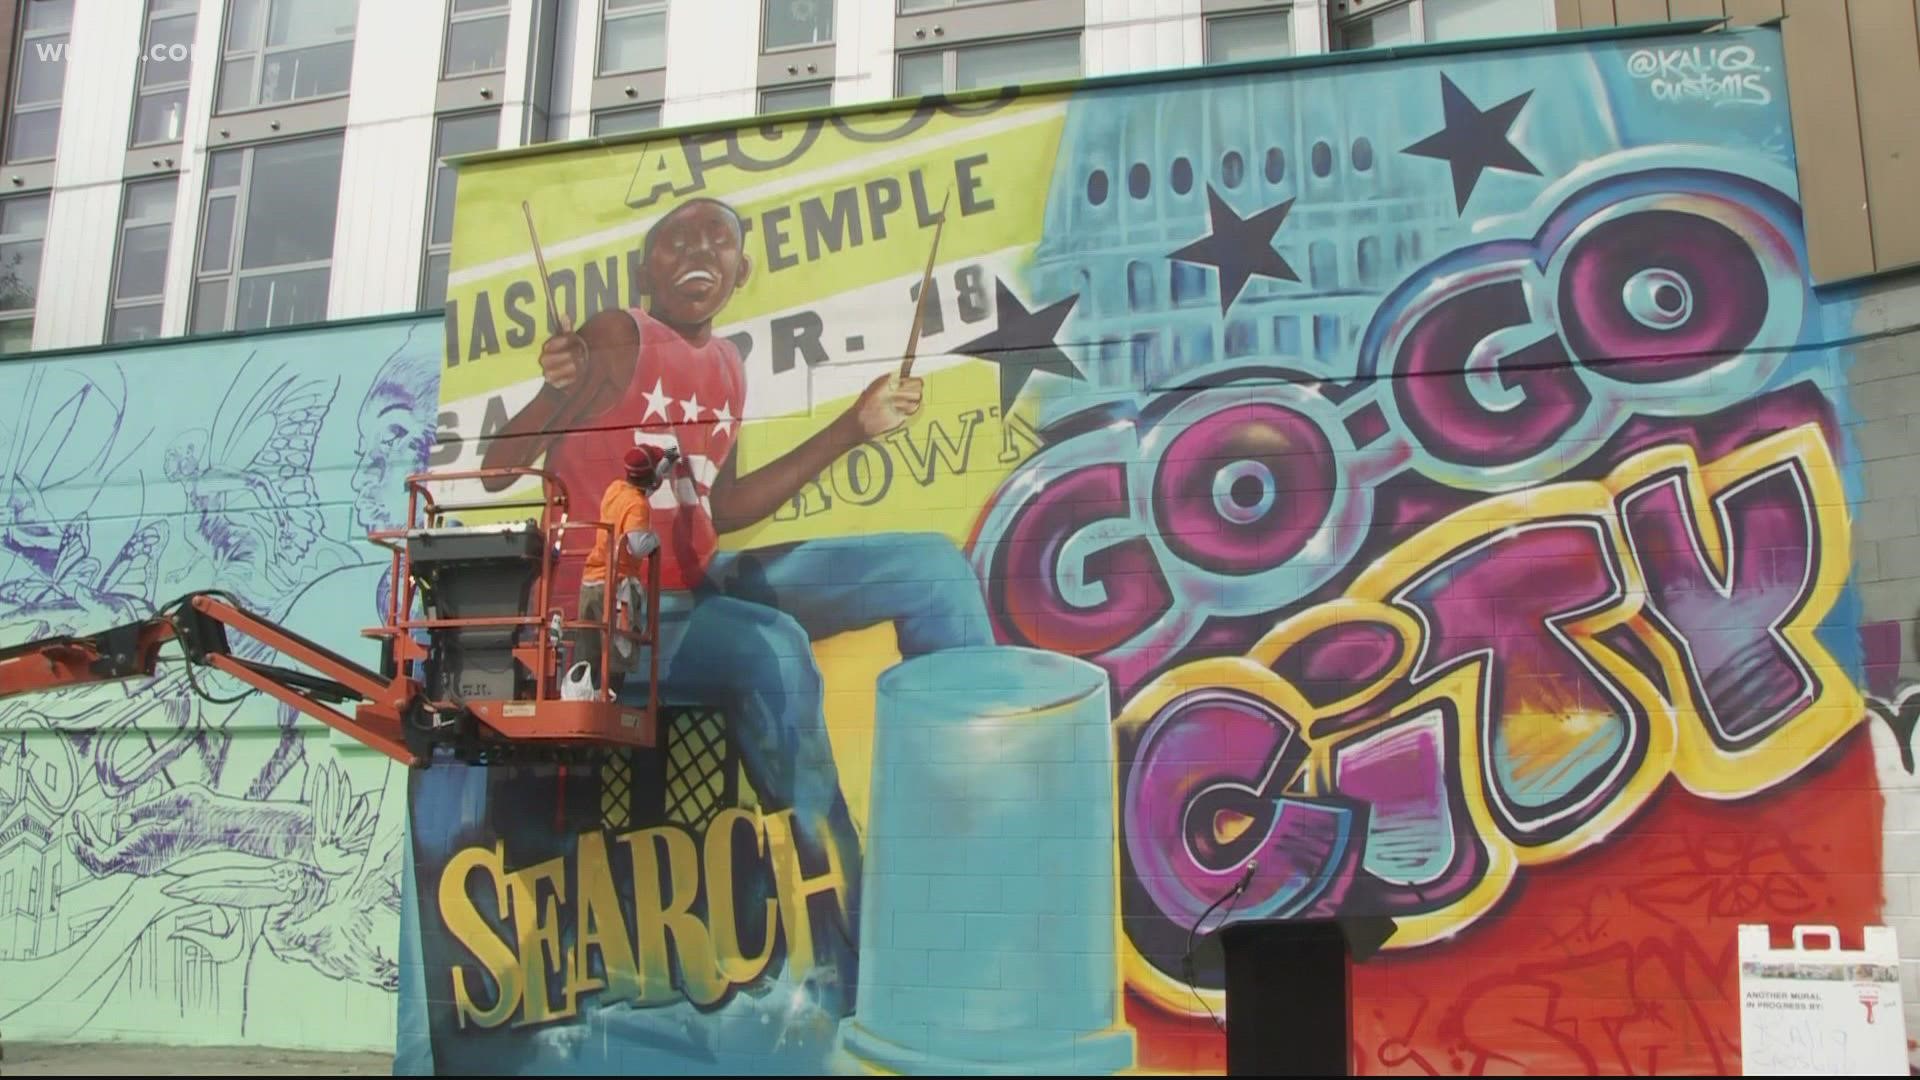 There's a new Go-Go mural in DC